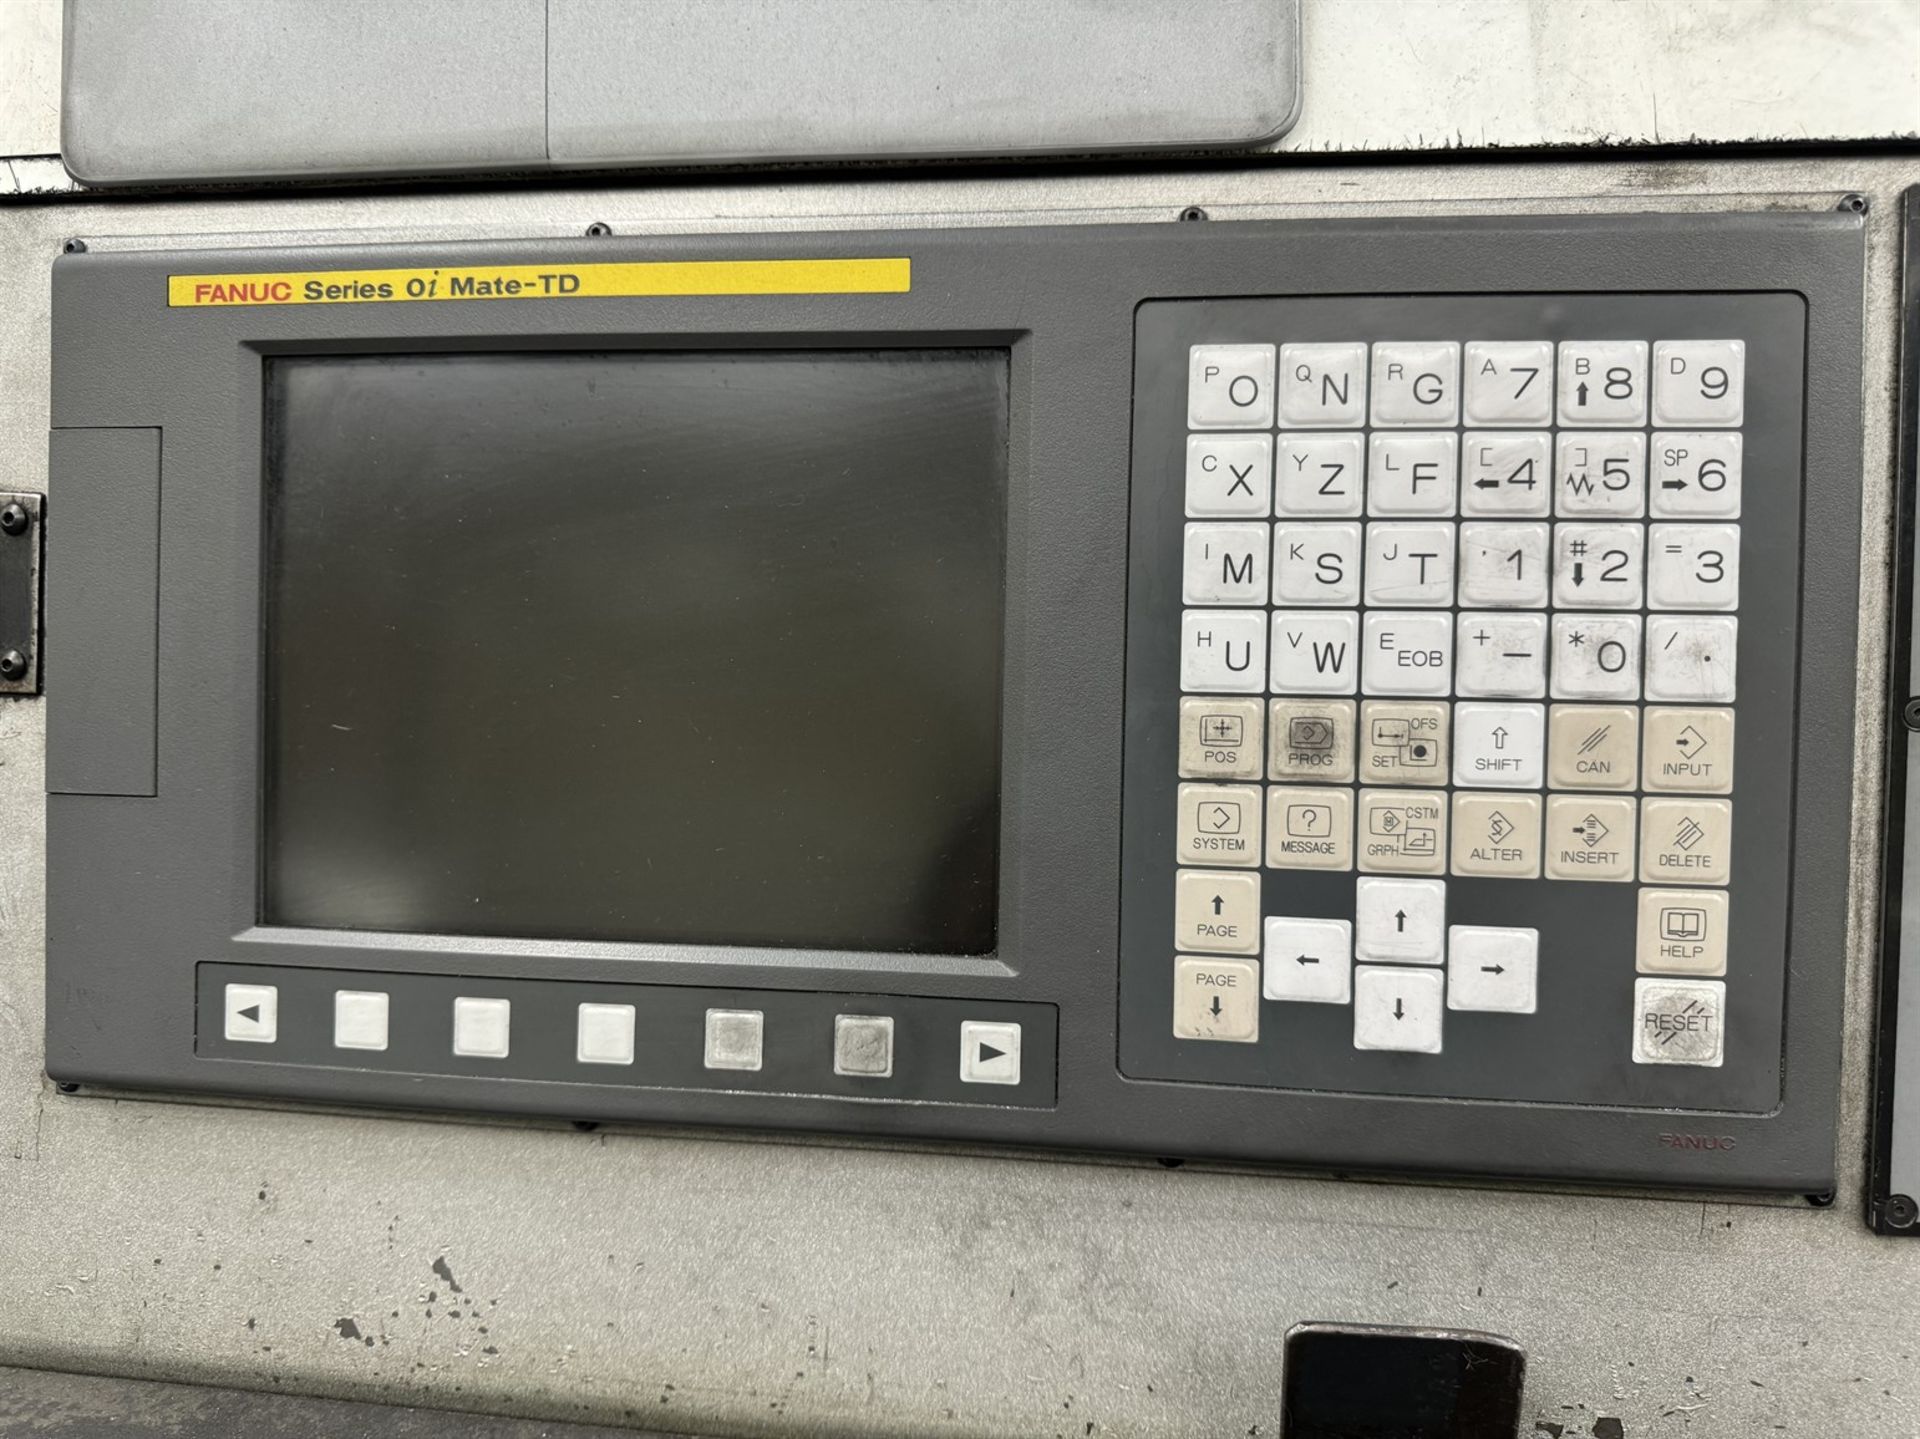 CUBIC GT-MINI Plus CNC Gang Tool Lathe, s/n 8801087, Fanuc Series Oi Mate-TD Control, 60mm Turning D - Image 6 of 9